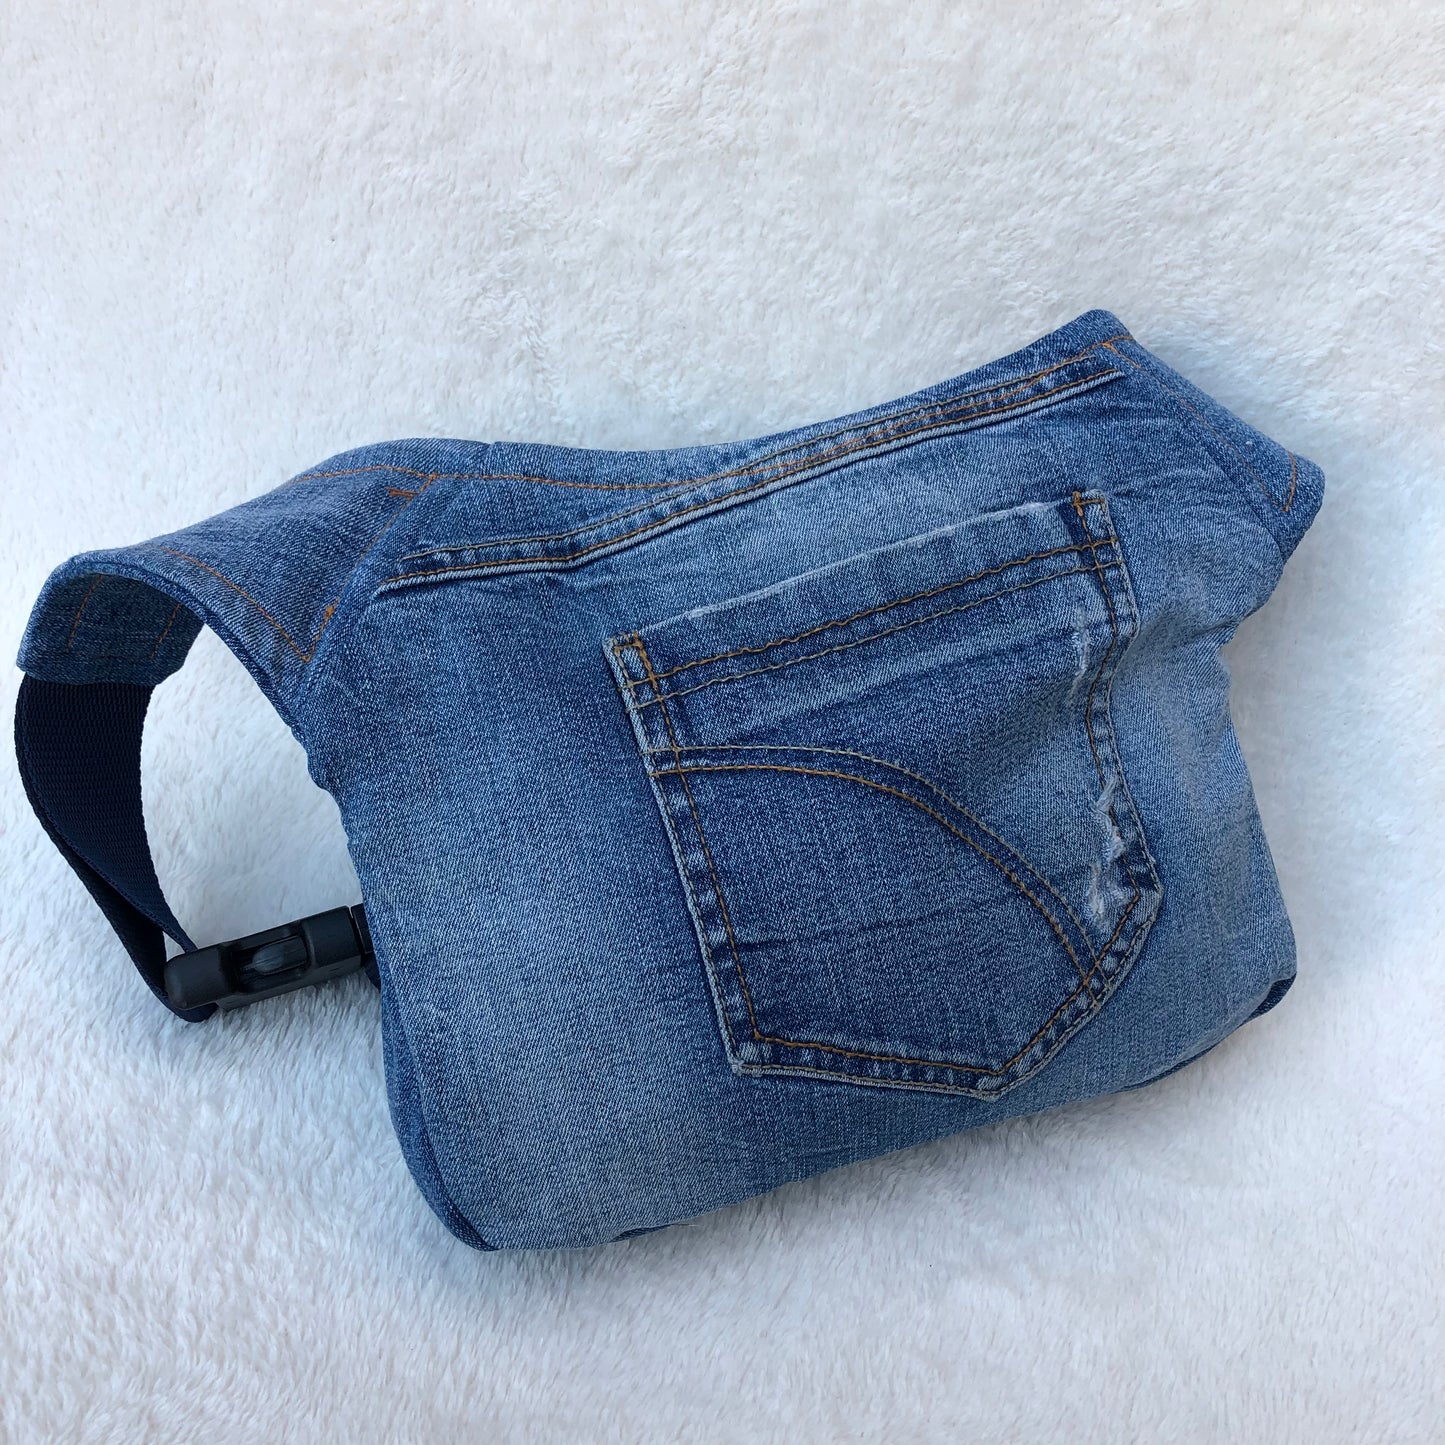 Unikat „Recycled Jeans“ Nr. 6447